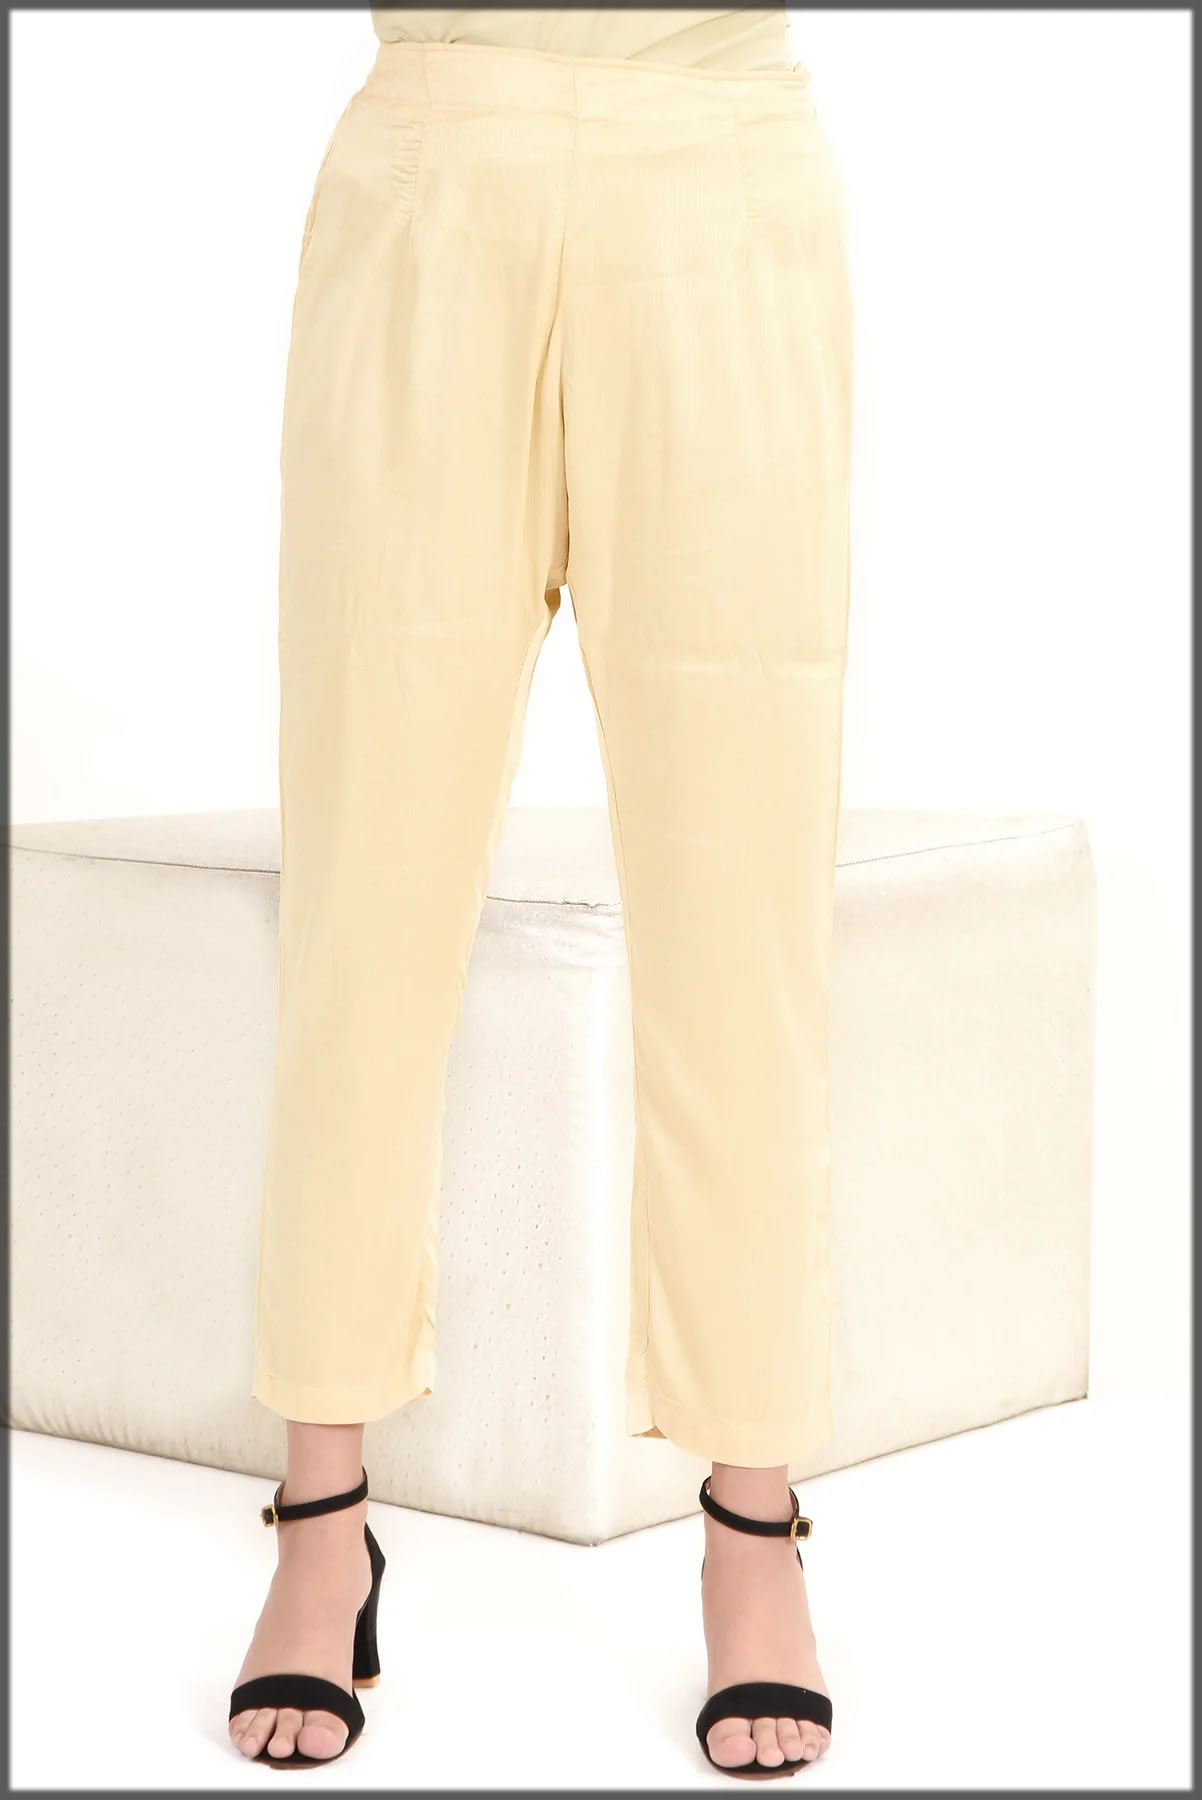 chenone winter bottom collection for women